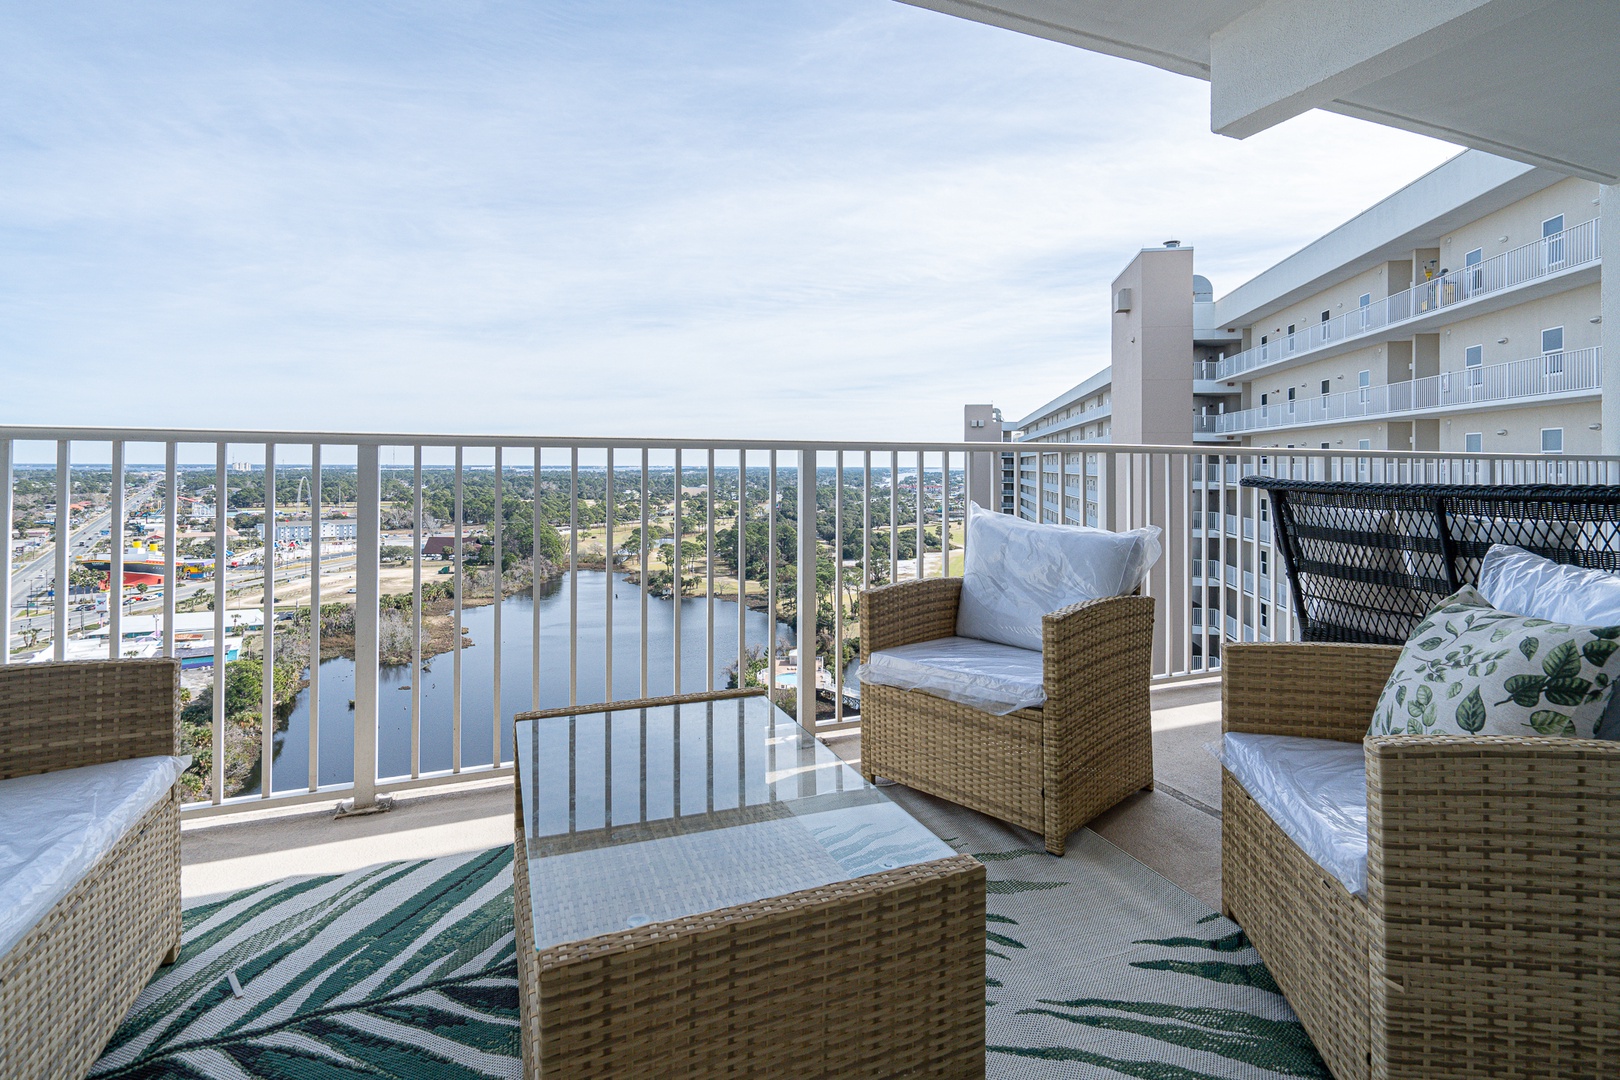 Step onto the balcony & lounge or dine with gorgeous panoramic views